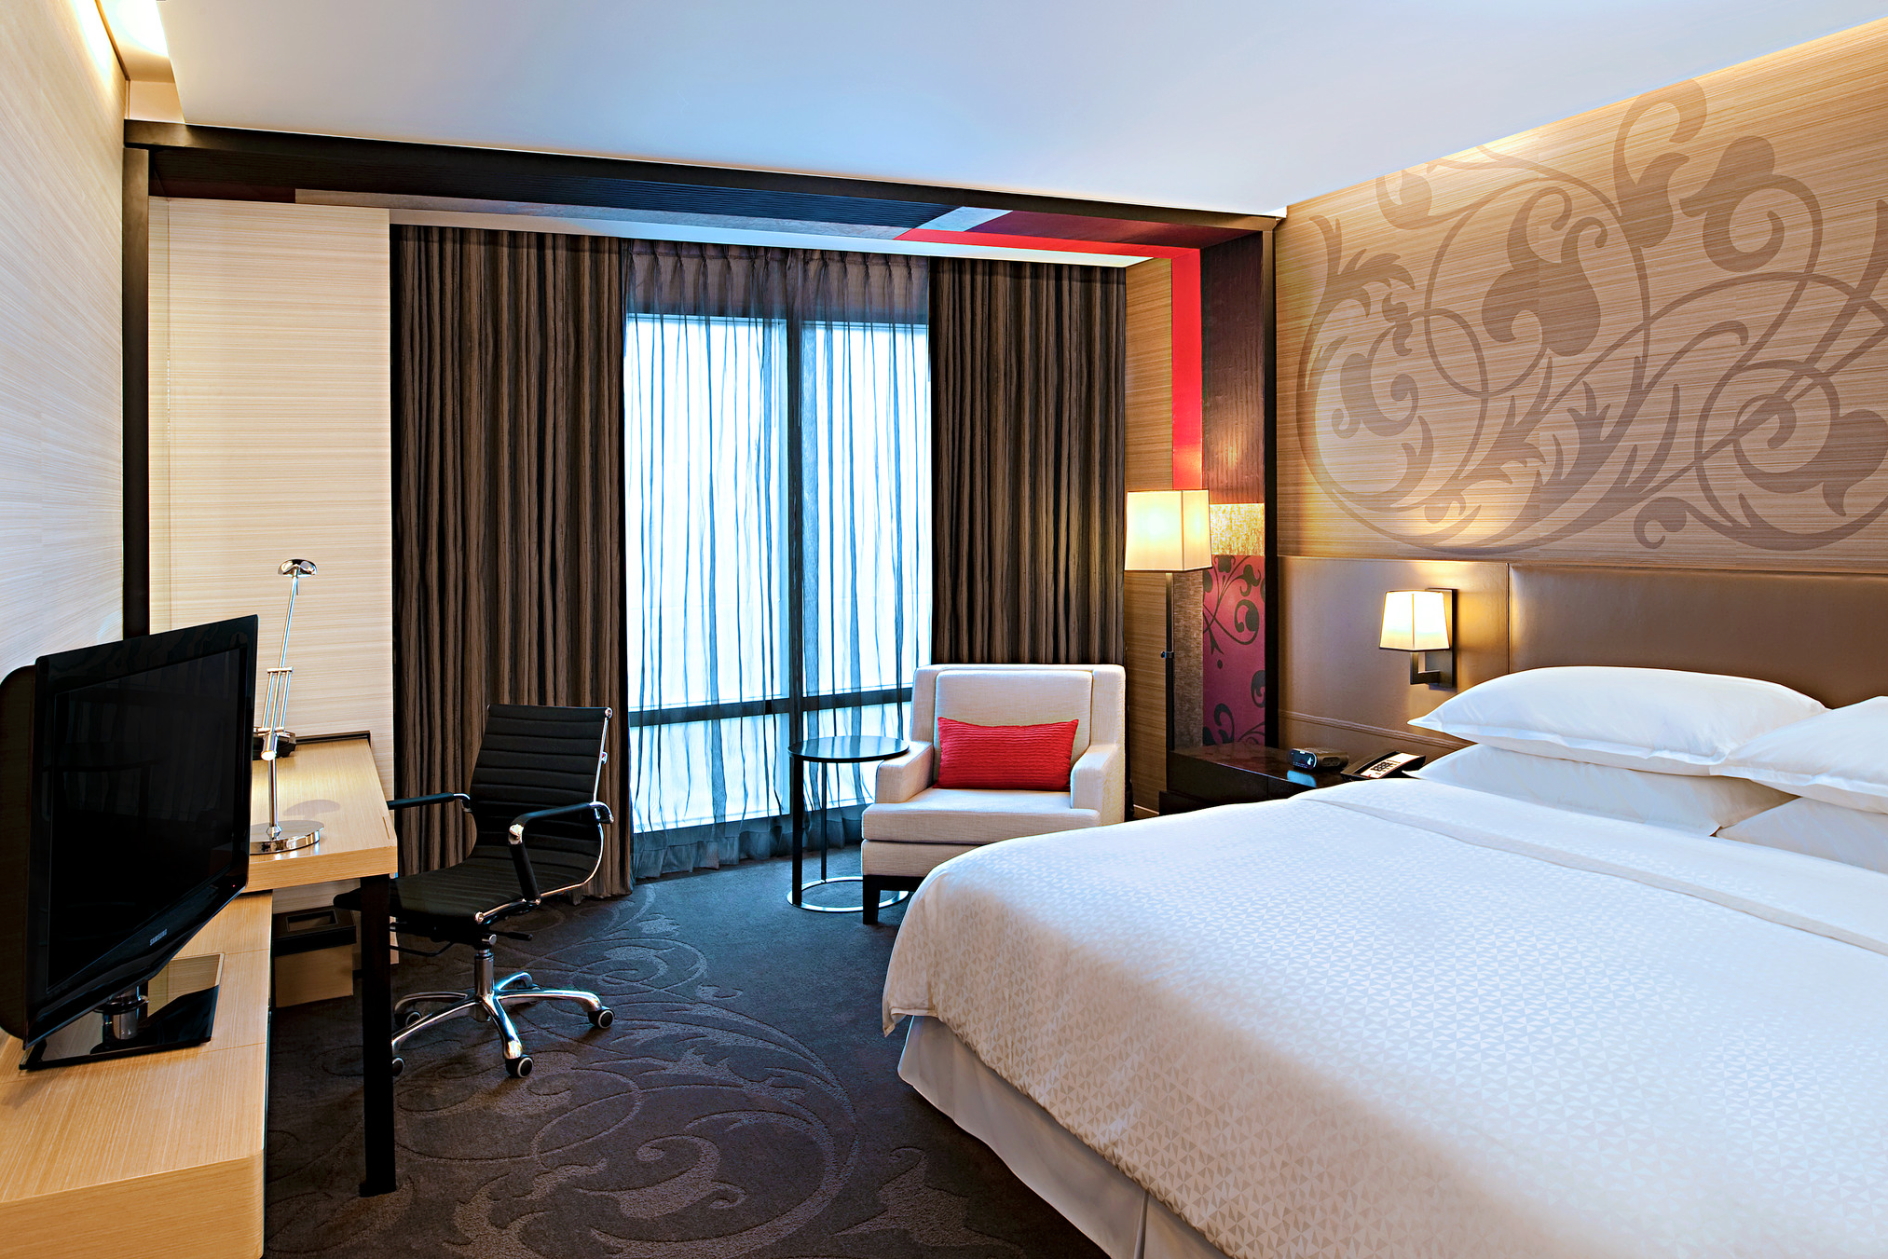 Deluxe Room at Four Points by Sheraton Bangkok Sukhumvit 15. Click to enlarge.